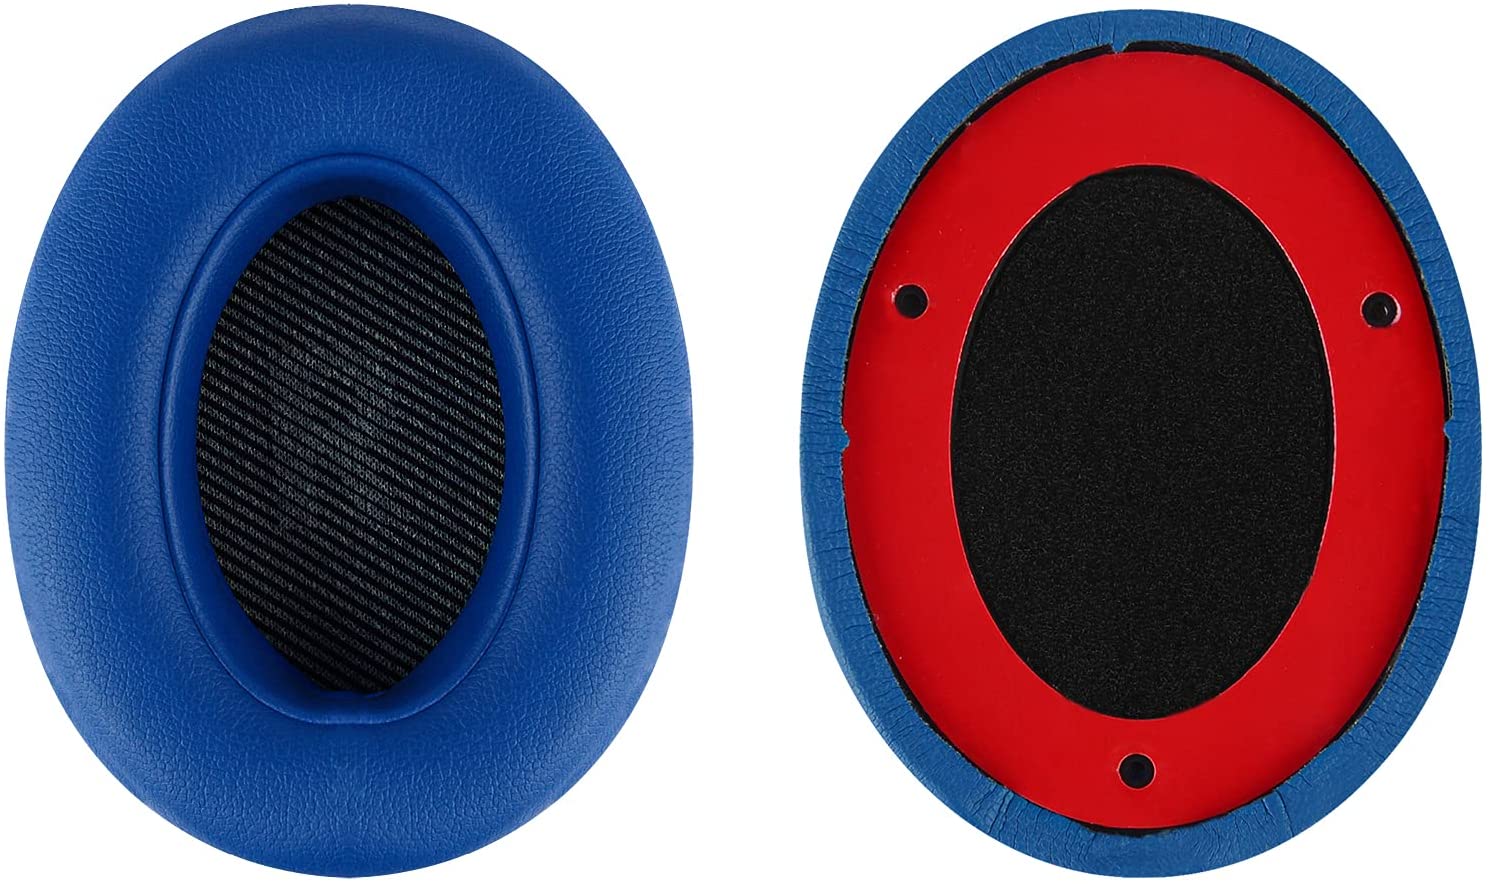 Geekria QuickFit Protein Leather Replacement Ear Pads for JBL Everest 700.